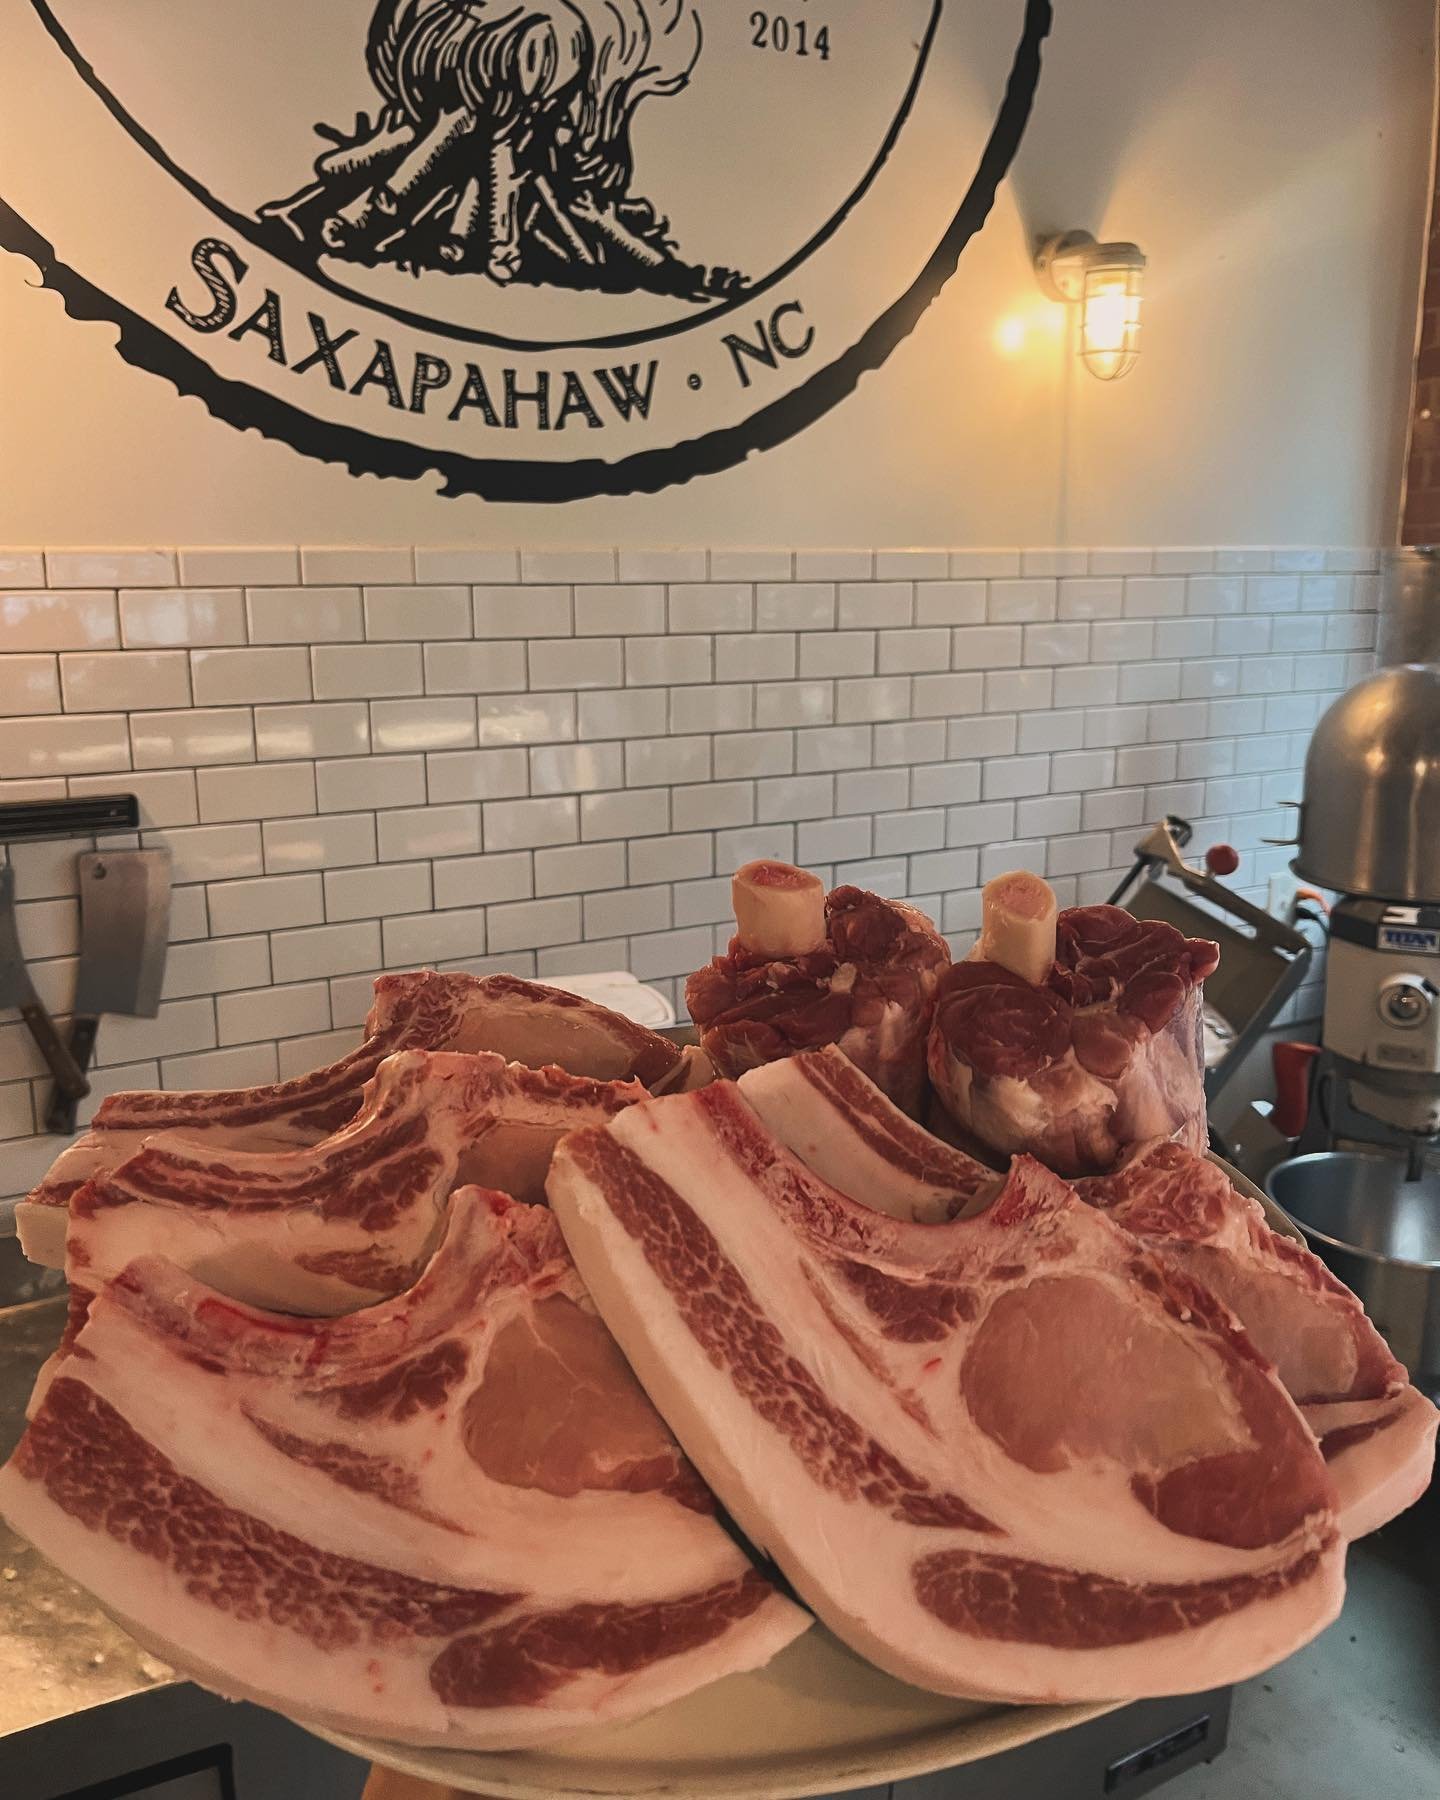 It would be an excellent week to come grab some pork. We got some of the best pigs we&rsquo;ve seen all year and are stocked with any cut you may want. Stop by and eat something delicious tonight!